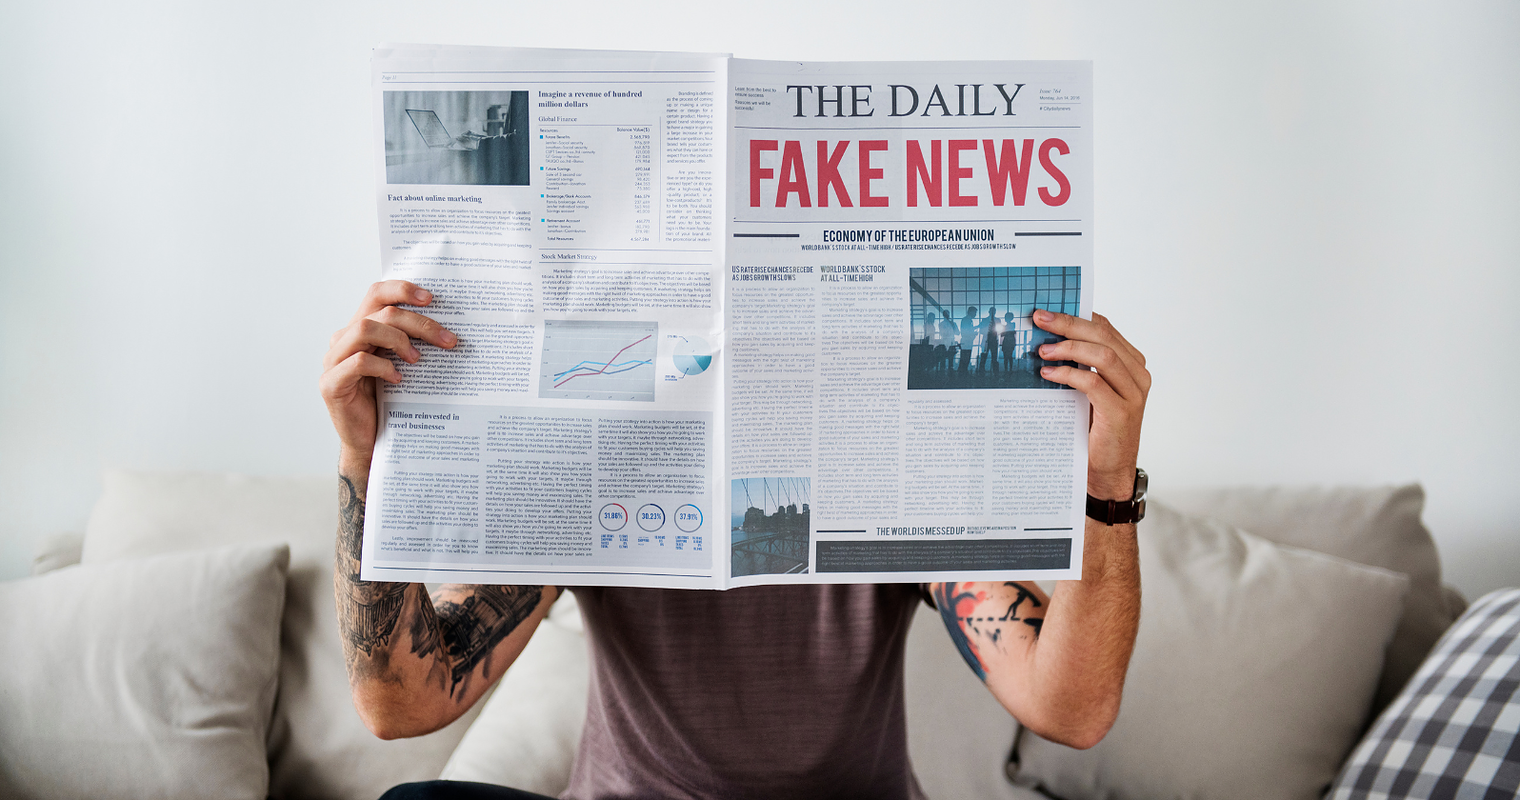 How To Identify Fake News From Real News Online